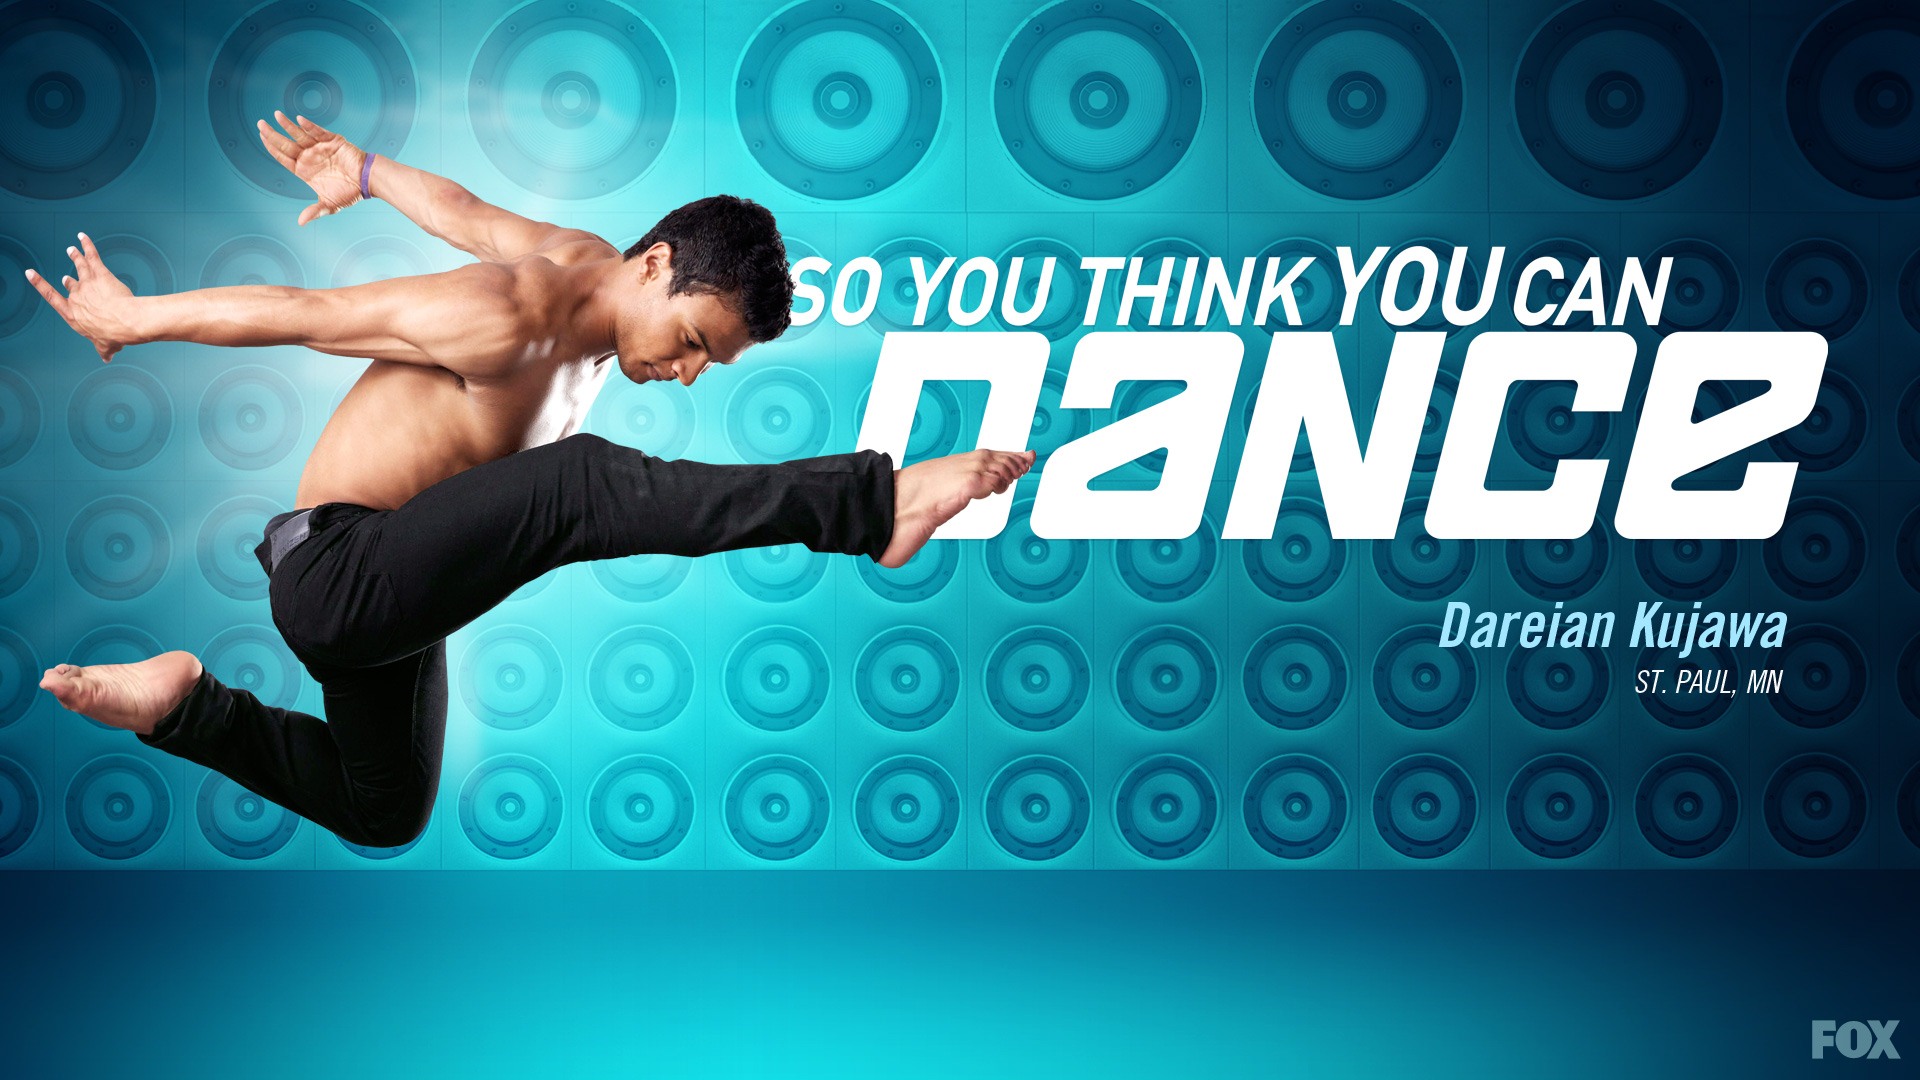 So You Think You Can Dance 舞林争霸 2012高清壁纸11 - 1920x1080